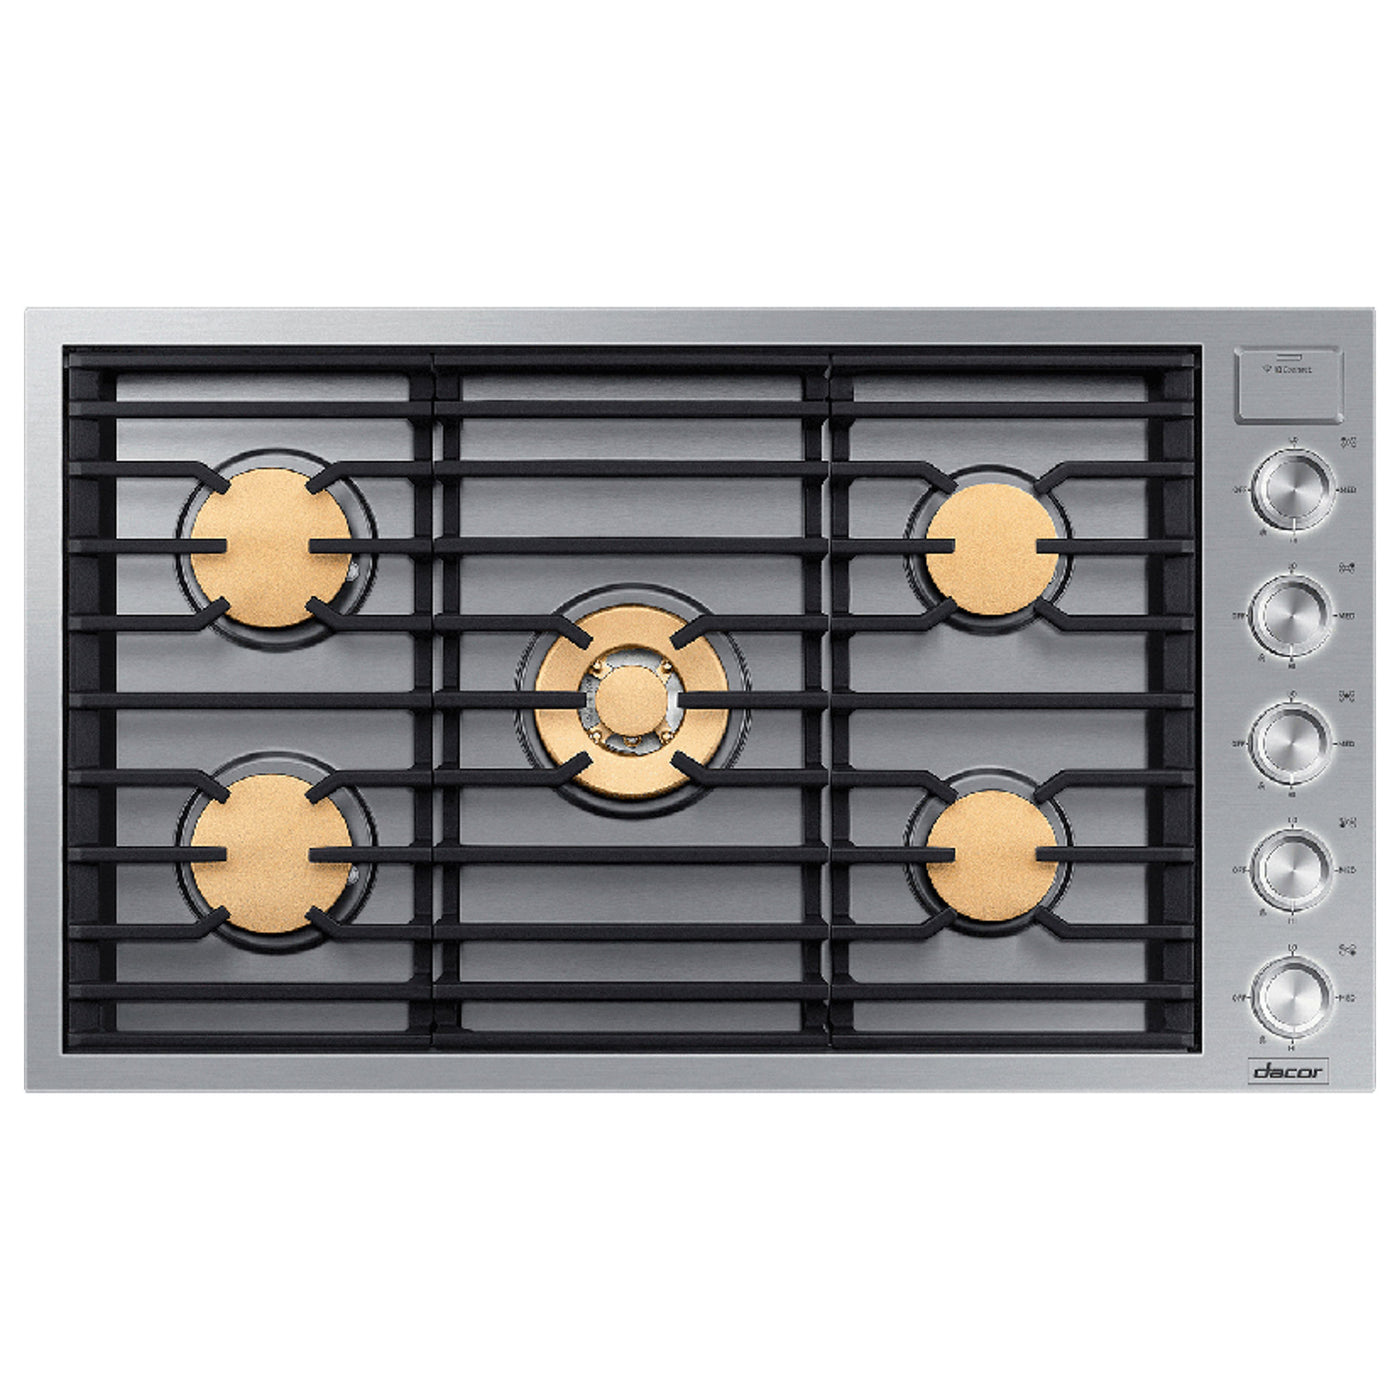 Dacor-DTG36M955FS natural gas cooktop w/ 5 burners